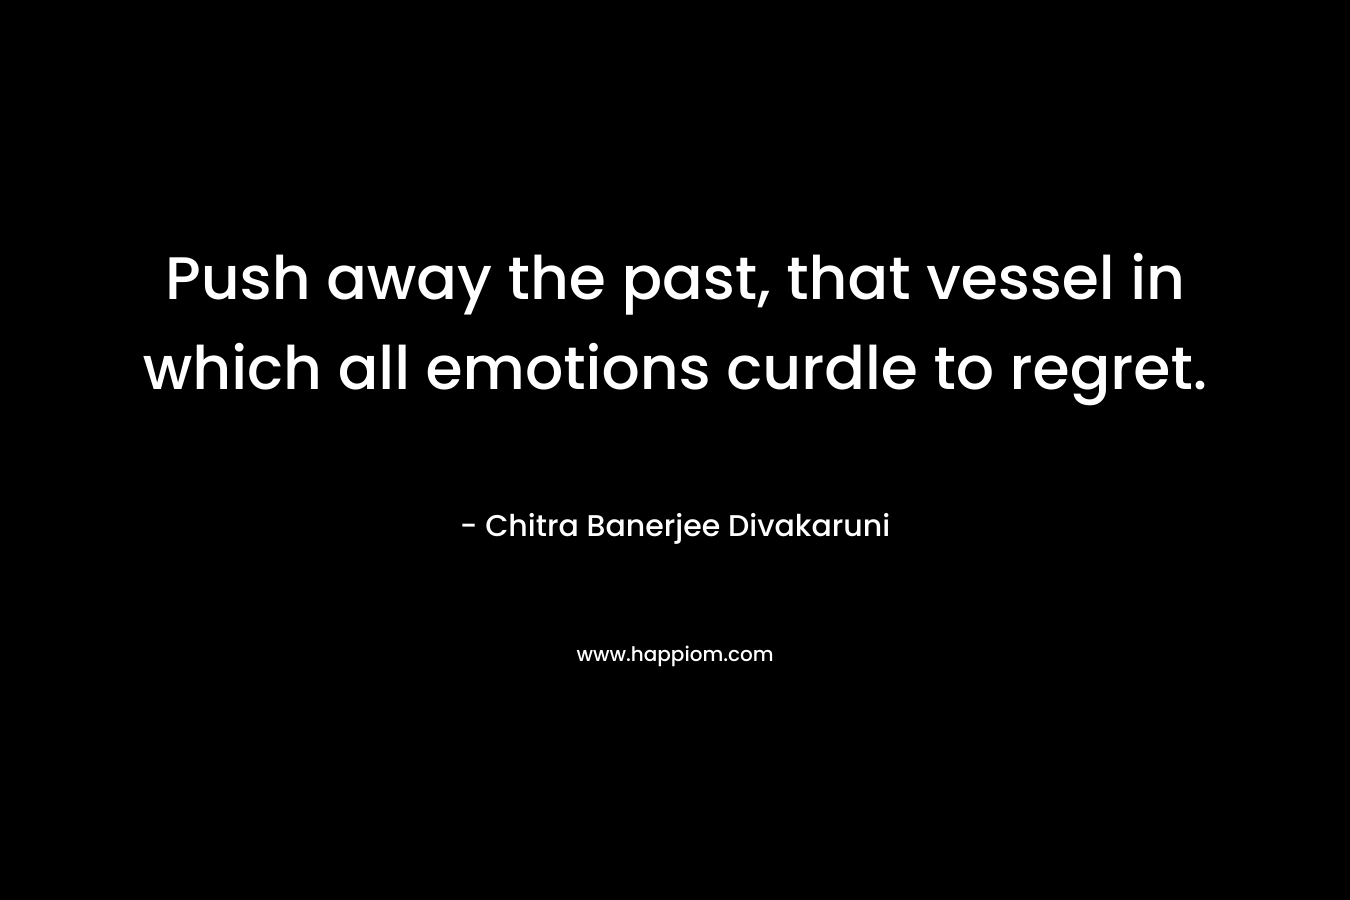 Push away the past, that vessel in which all emotions curdle to regret.